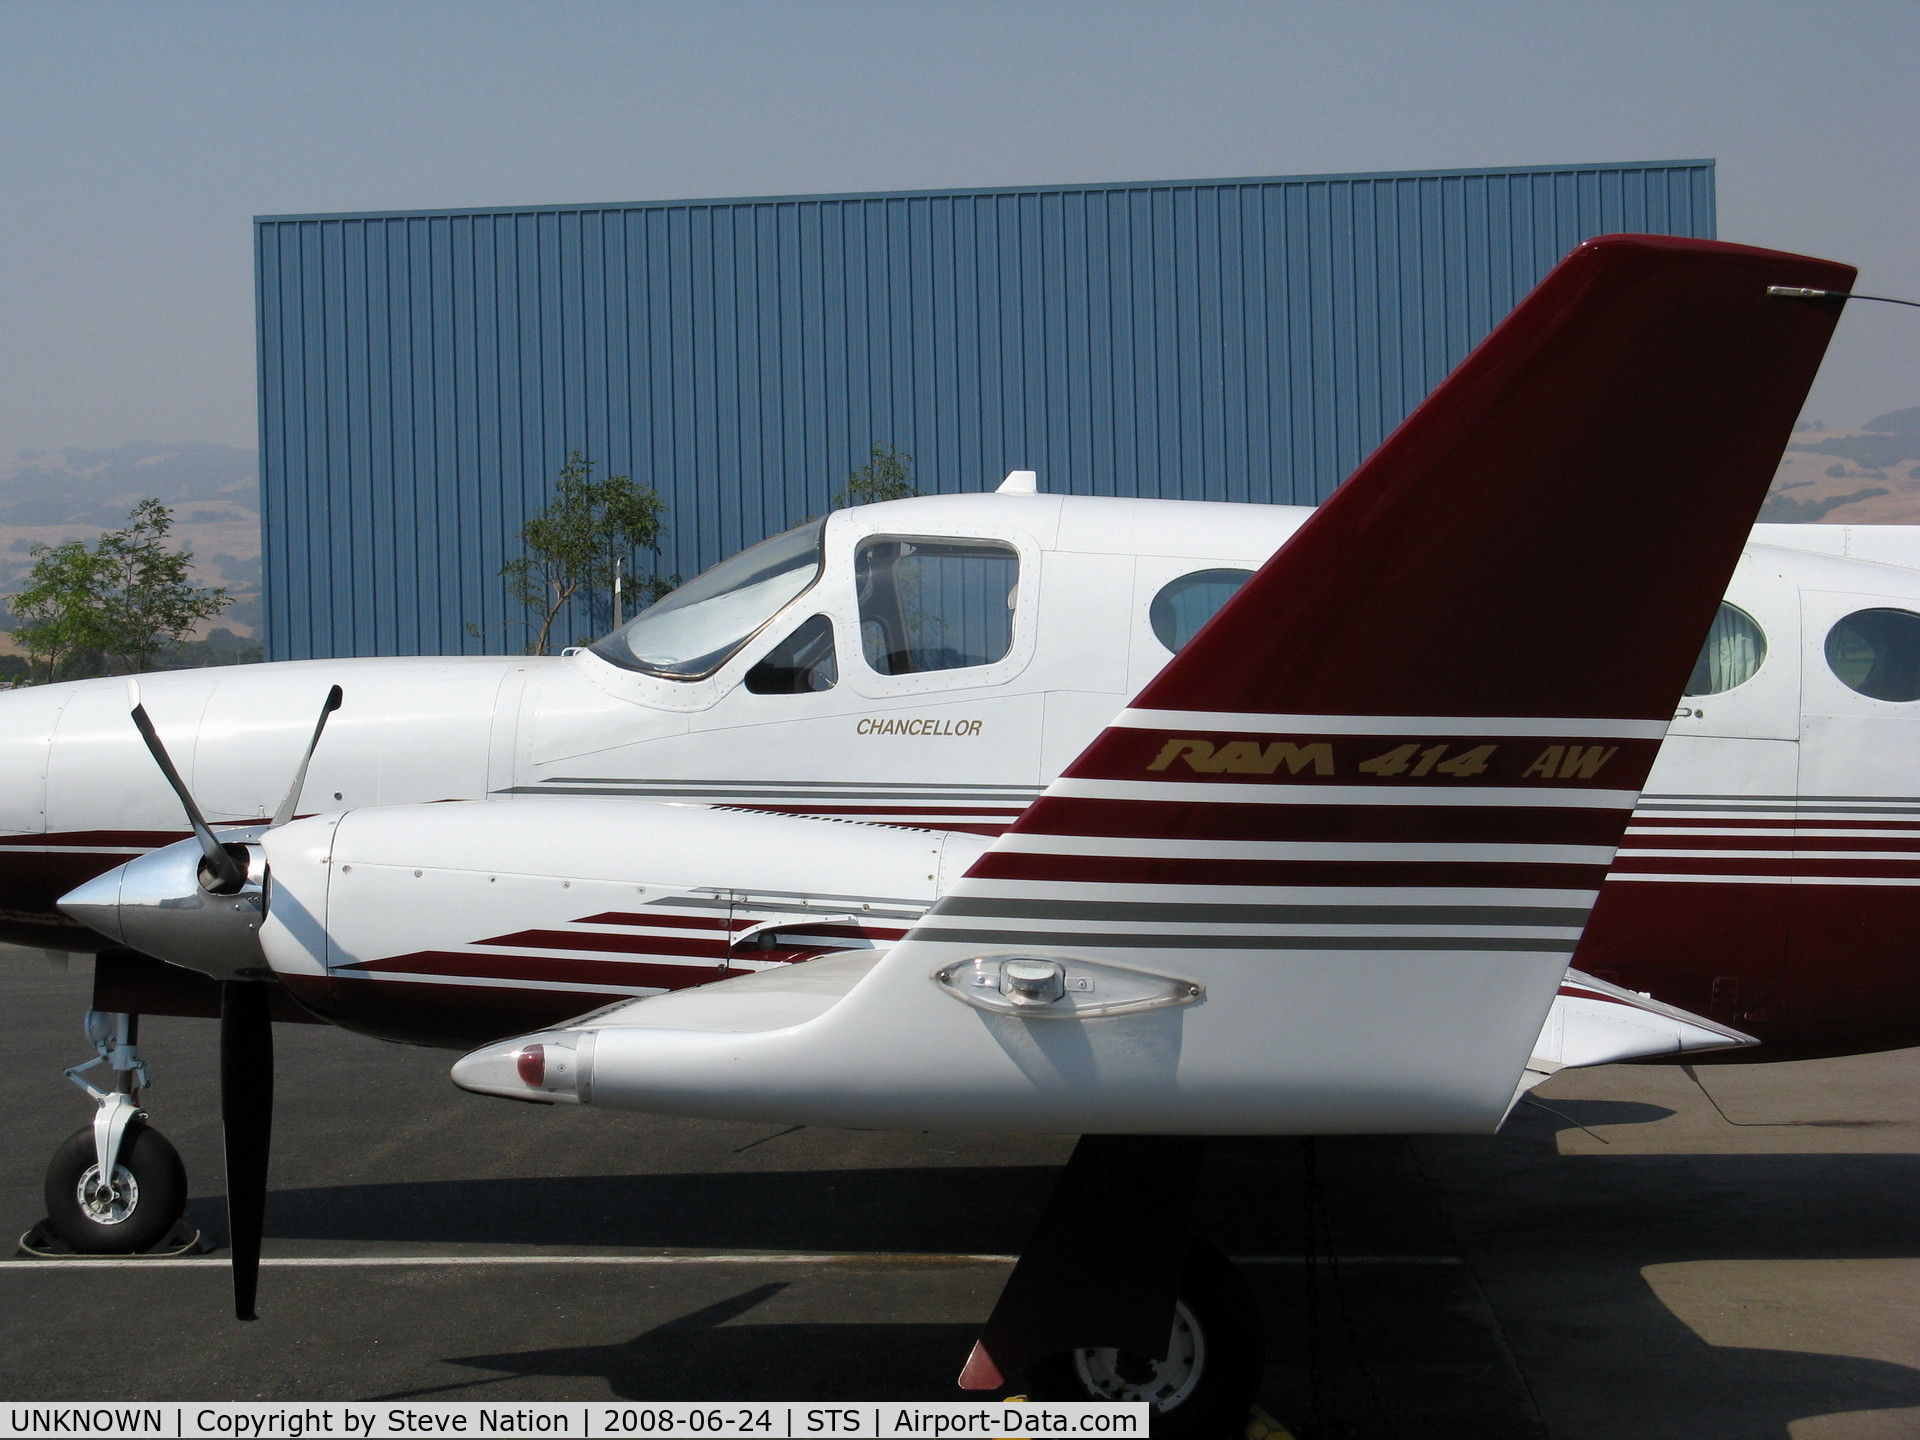 UNKNOWN, Miscellaneous Various C/N unknown, RAM conversion CLOSE-UP winglets 1979 Cessna 414A N414GM? (no rudder) @ Petaluma, CA